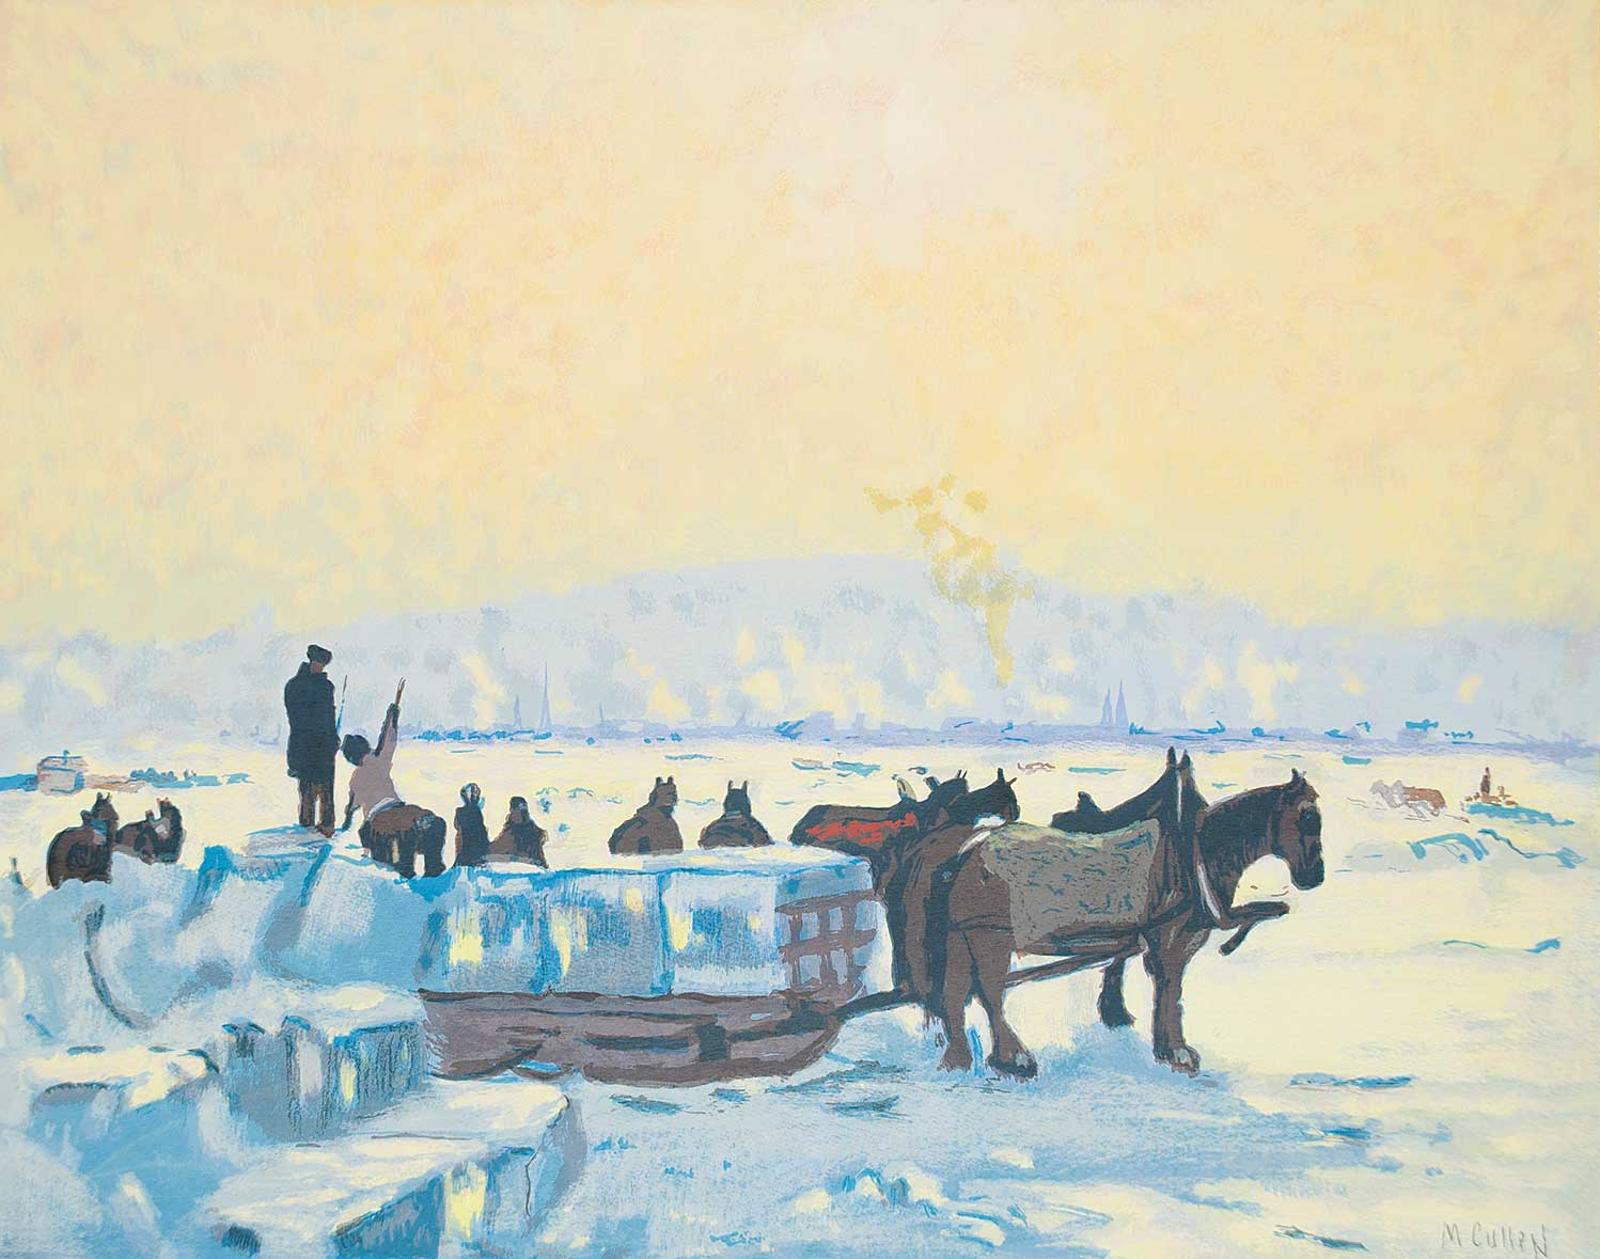 Maurice Galbraith Cullen (1866-1934) - Untitled - The Icecutters